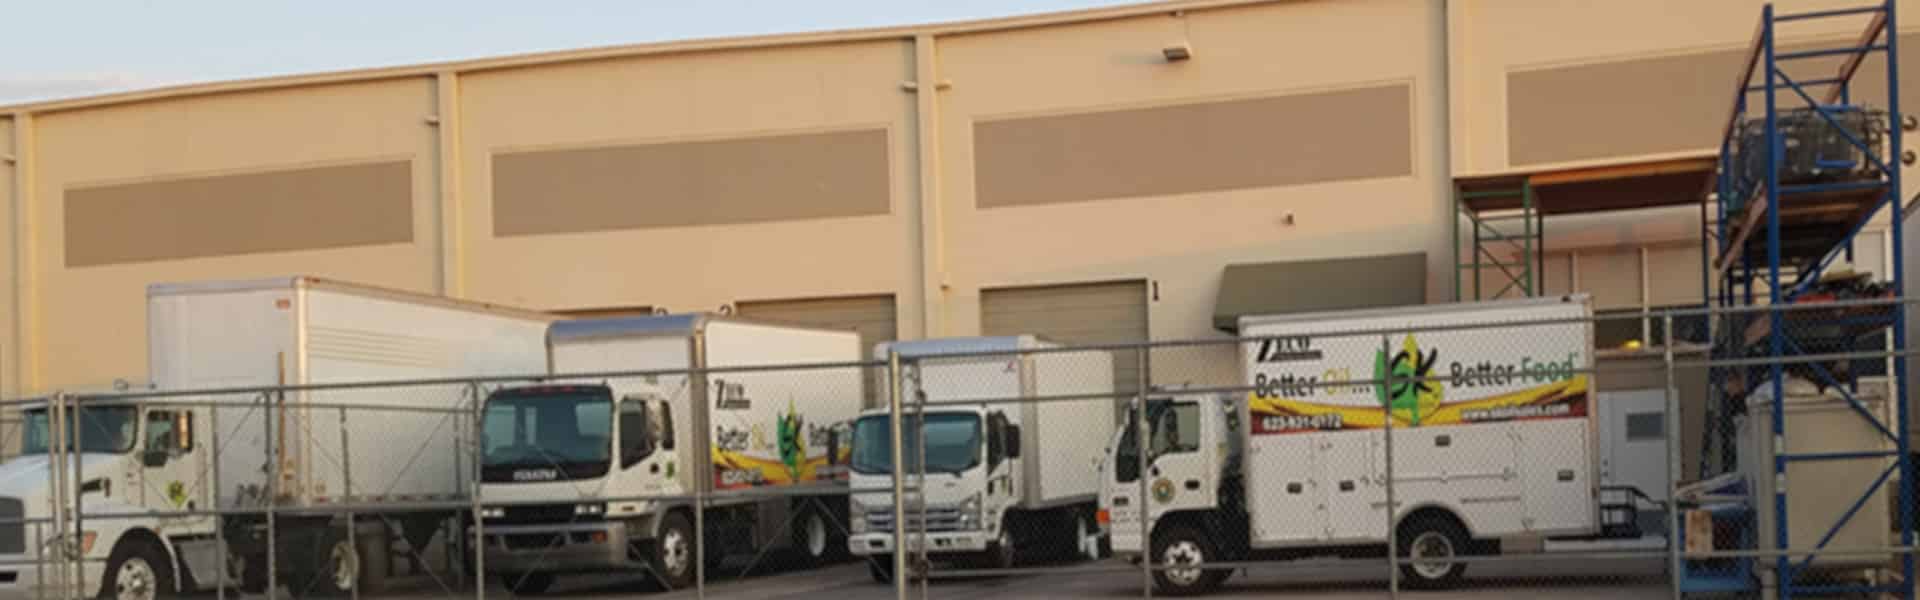 SK Oil Sales Warehouse with Four Trucks